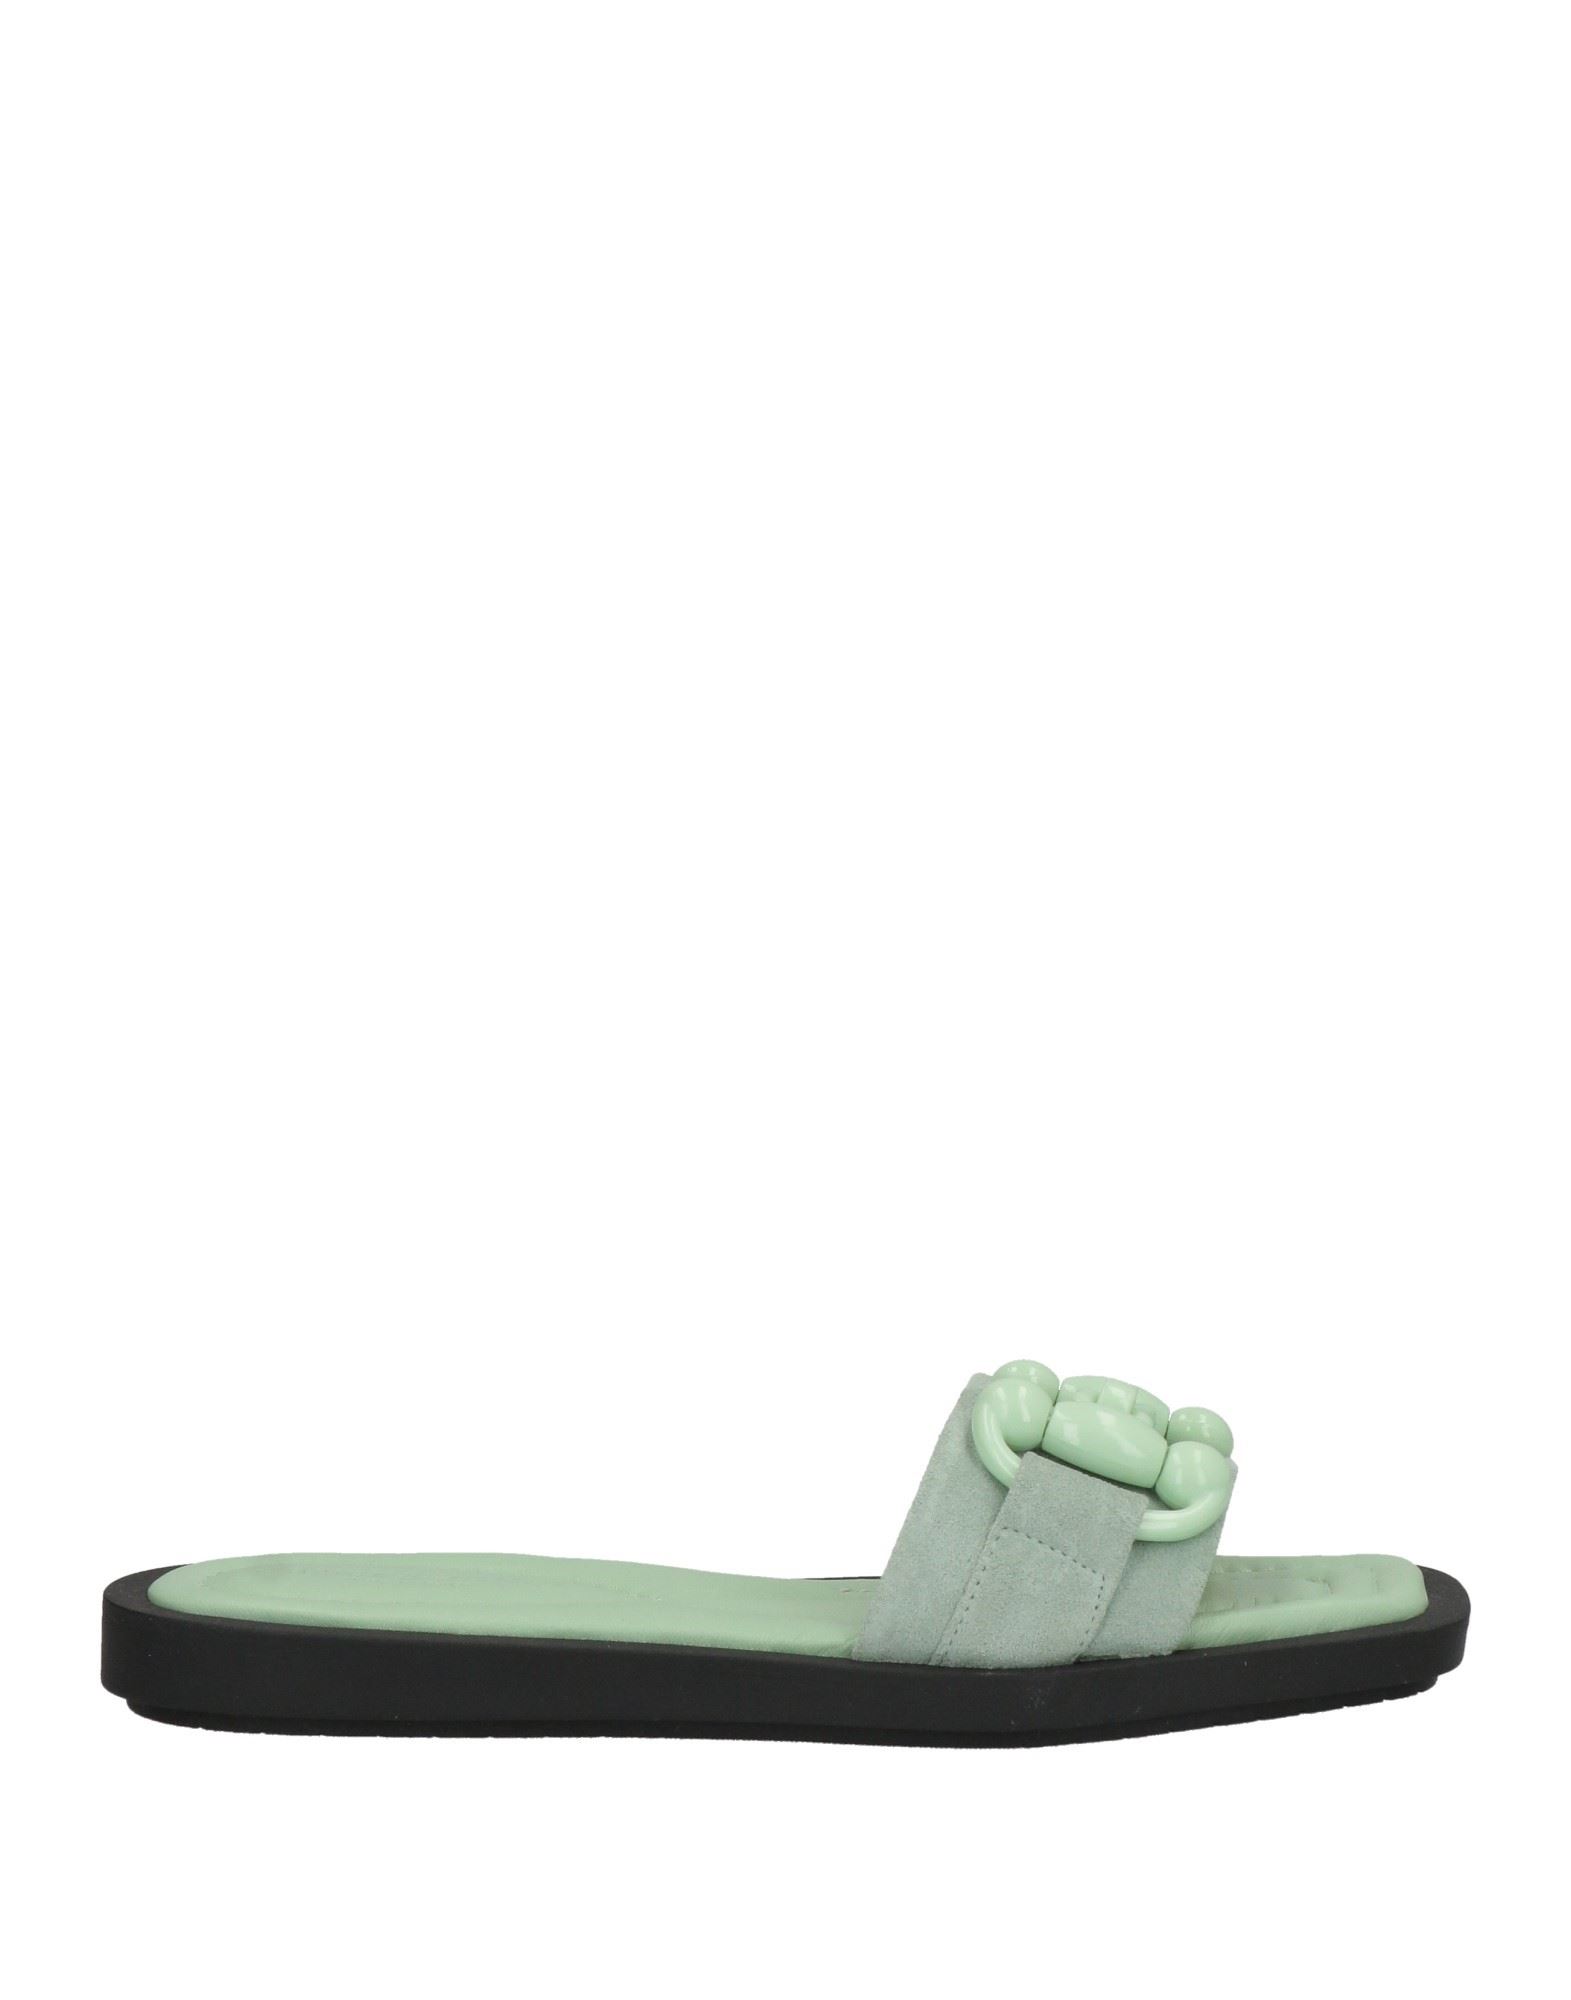 Janet & Janet Woman Sandals Sage Green Size 8 Soft Leather